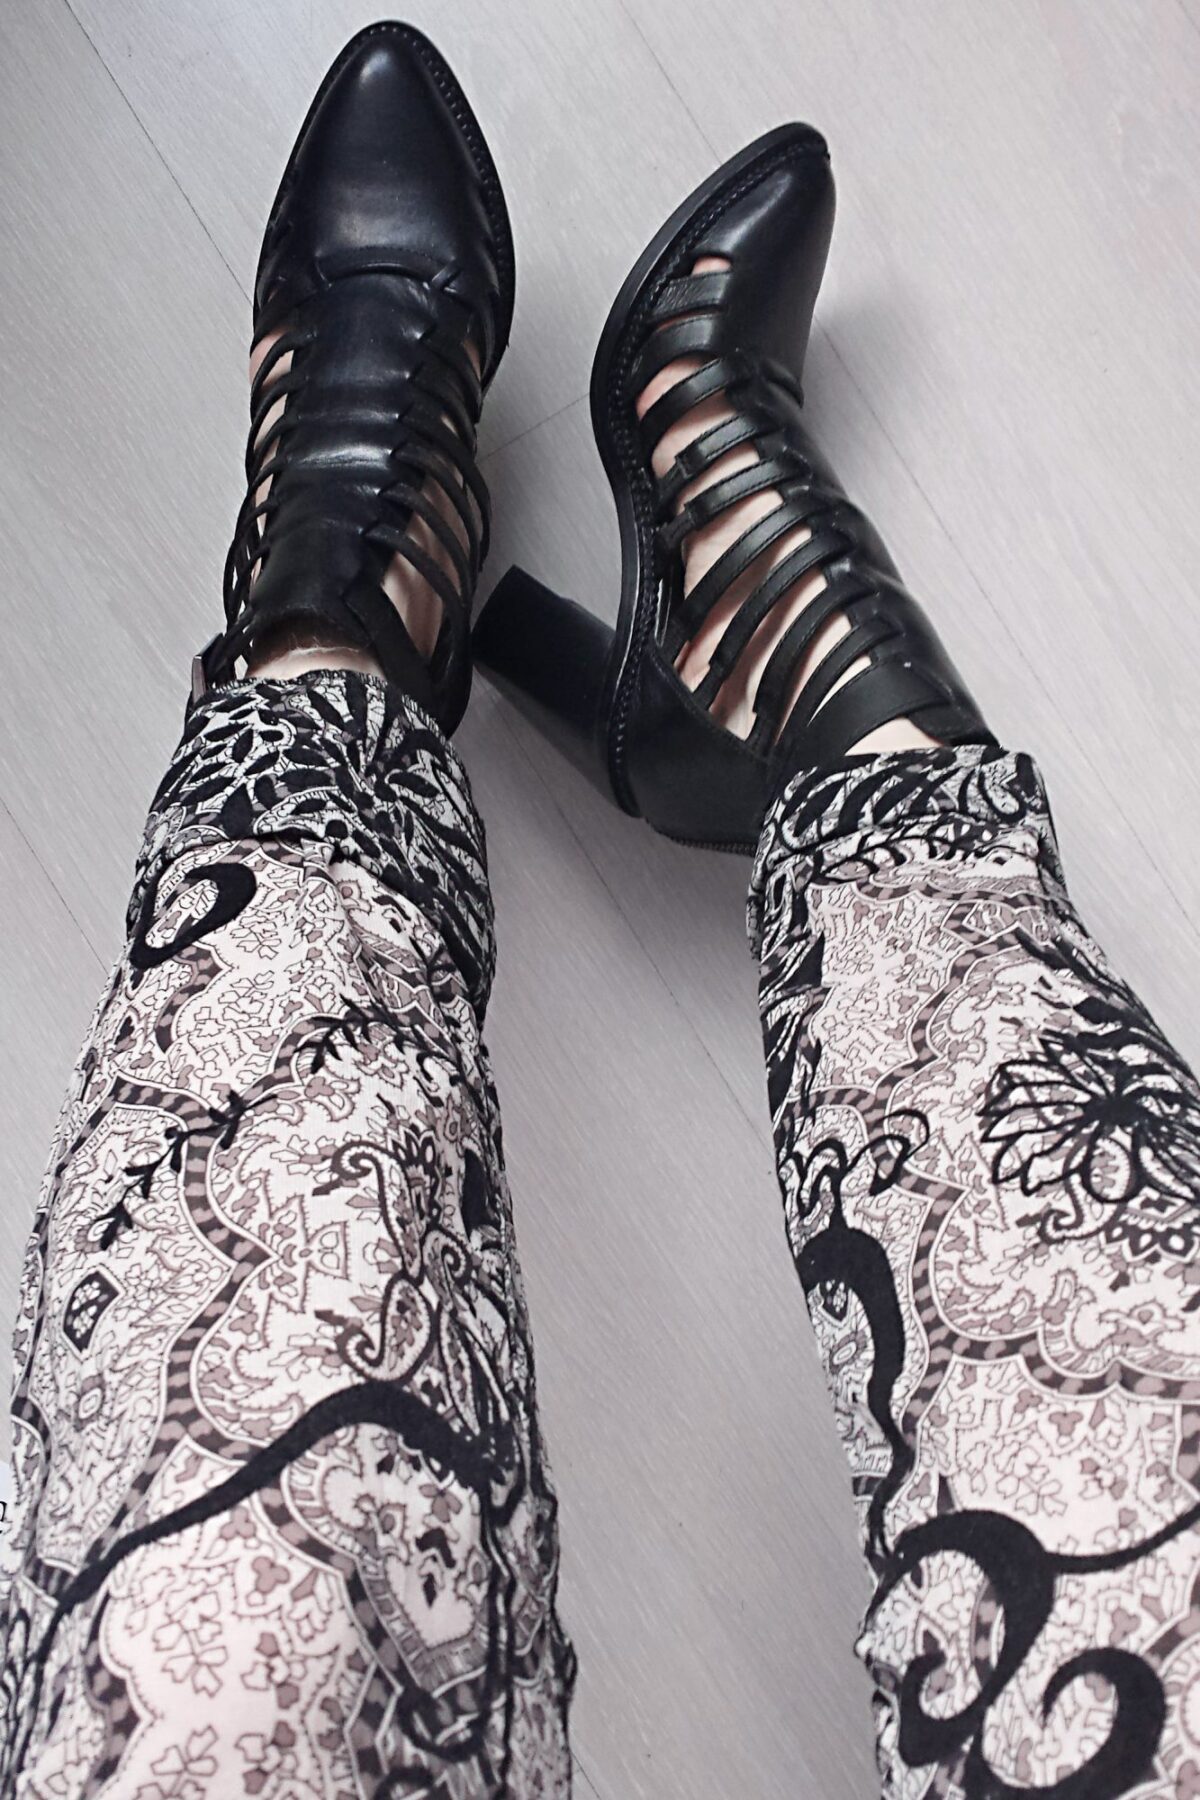 fashion trend style paisley print velvet trousers cut out heeled boots asos lavish alice